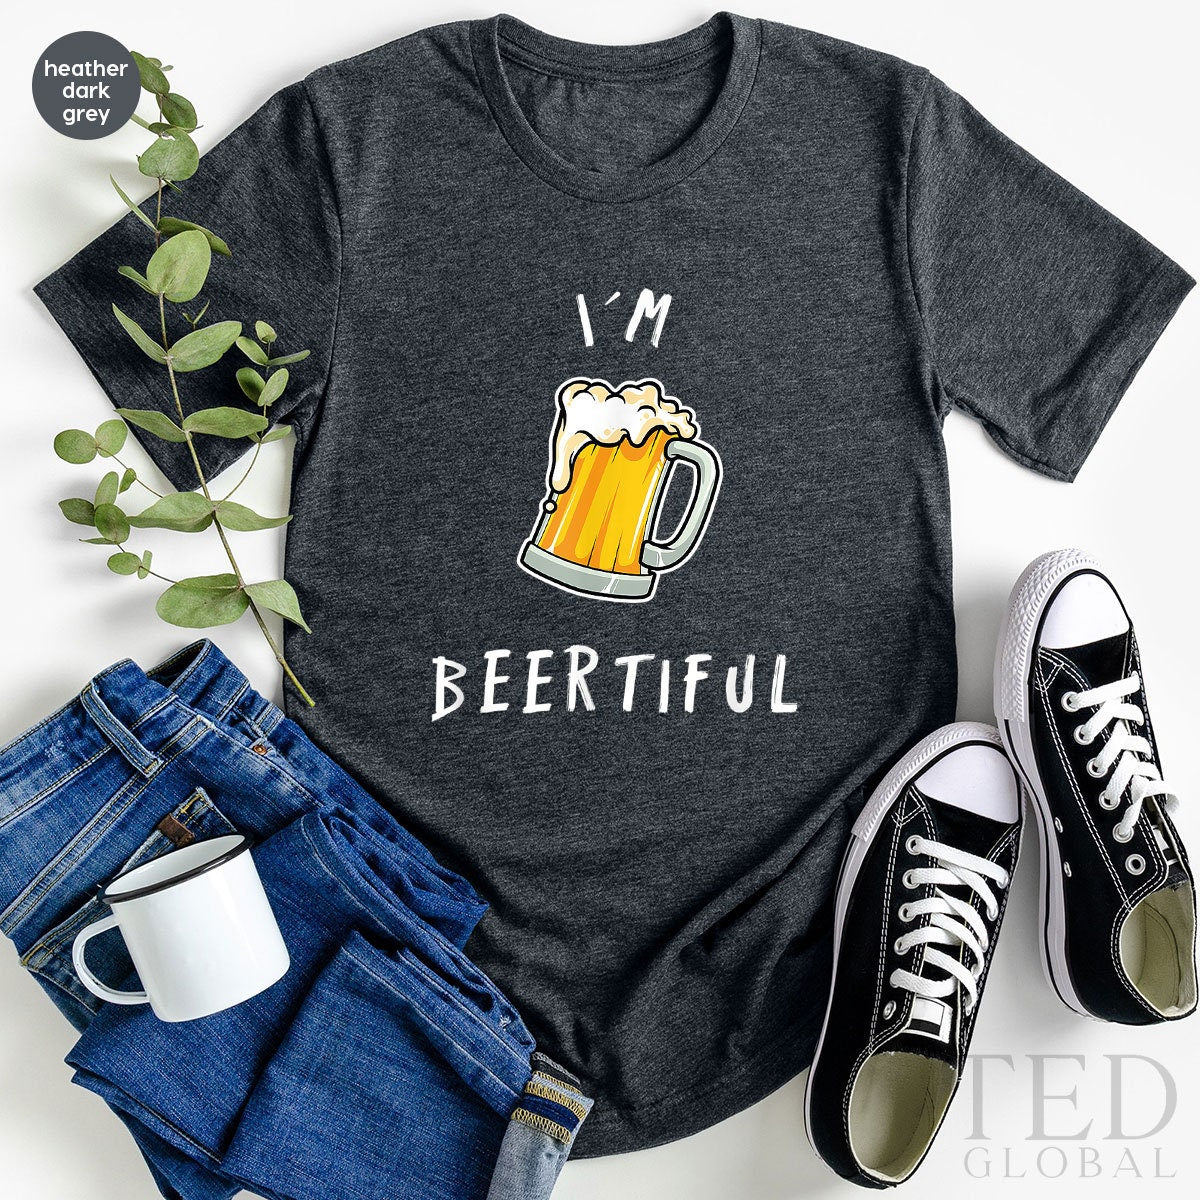 Cute Drinker T-Shirt, I'm Beertiful T Shirt, Beer Lover Tee, Drinking Day Shirts, Weekend Party Shirt, Funny Alcohol TShirt, Gift For Barmen - Fastdeliverytees.com